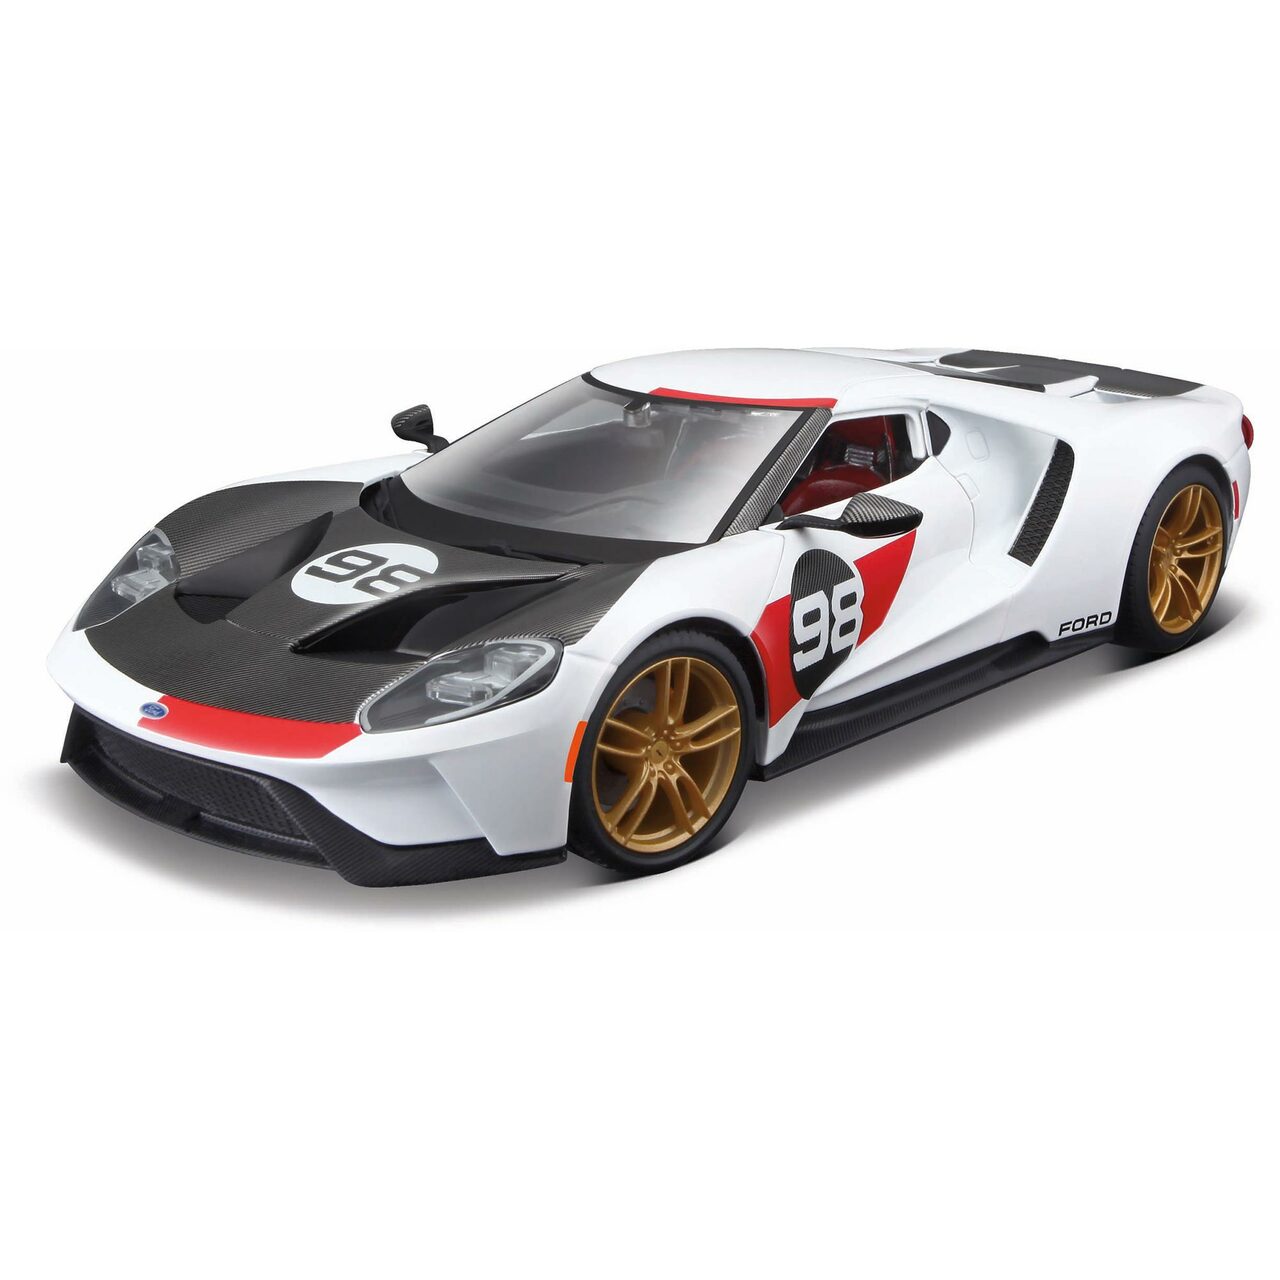 Игрушечная машинка Maisto Ford GT Heritage 2021, 1:18, белая 31390 maisto 1 64 flatbed volkswagen chevrolet 2017 ford gt transport trailer die casting alloy car model collection gift toy boys